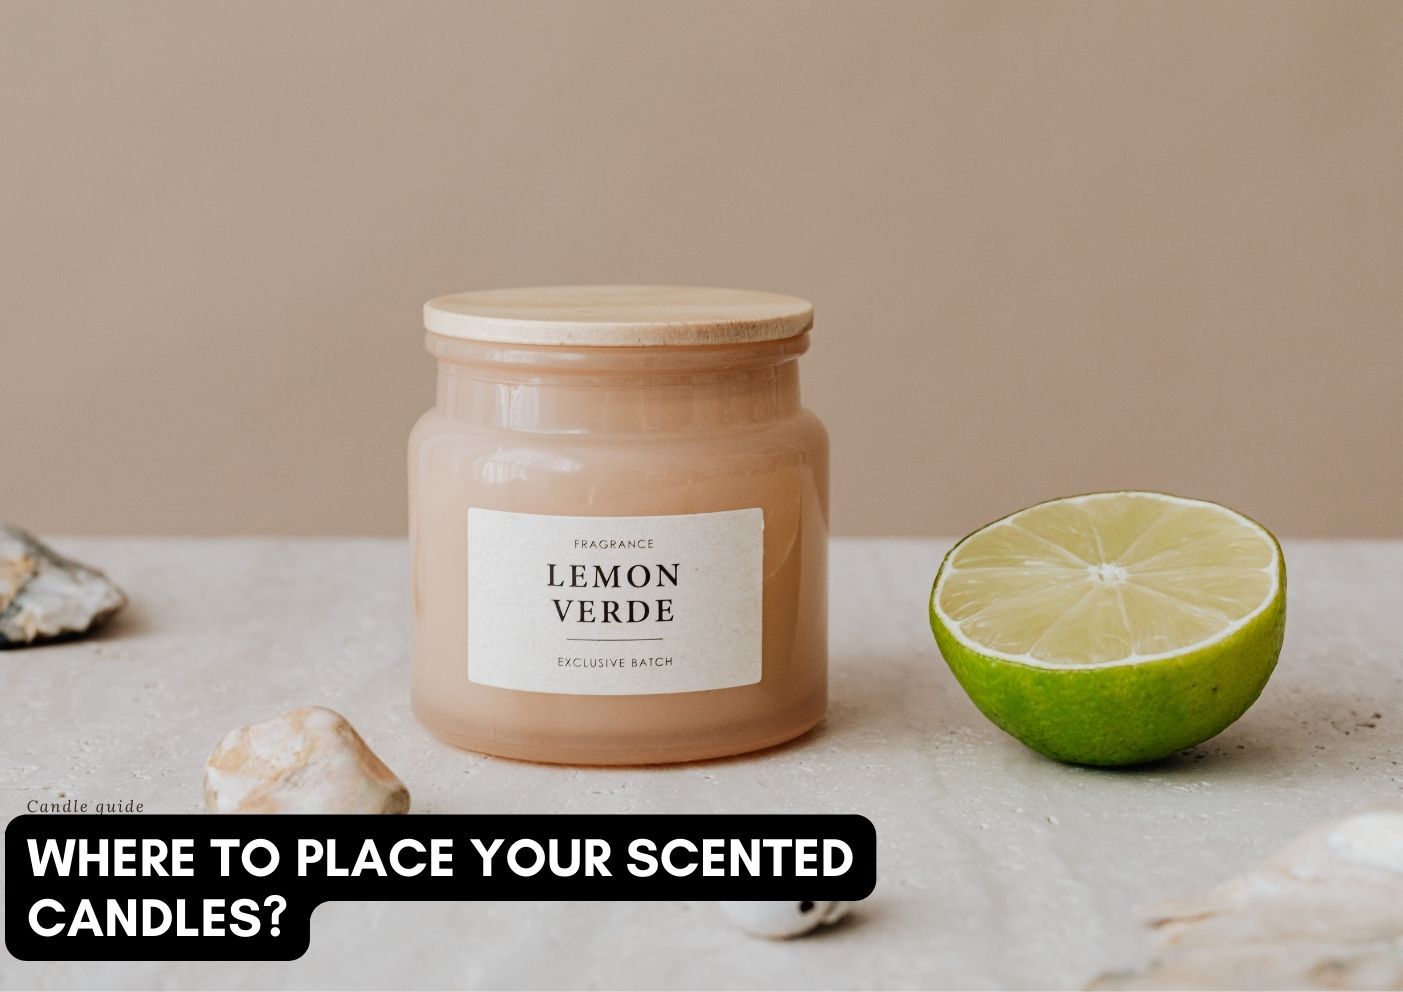 Where to Place Your Scented Candles?